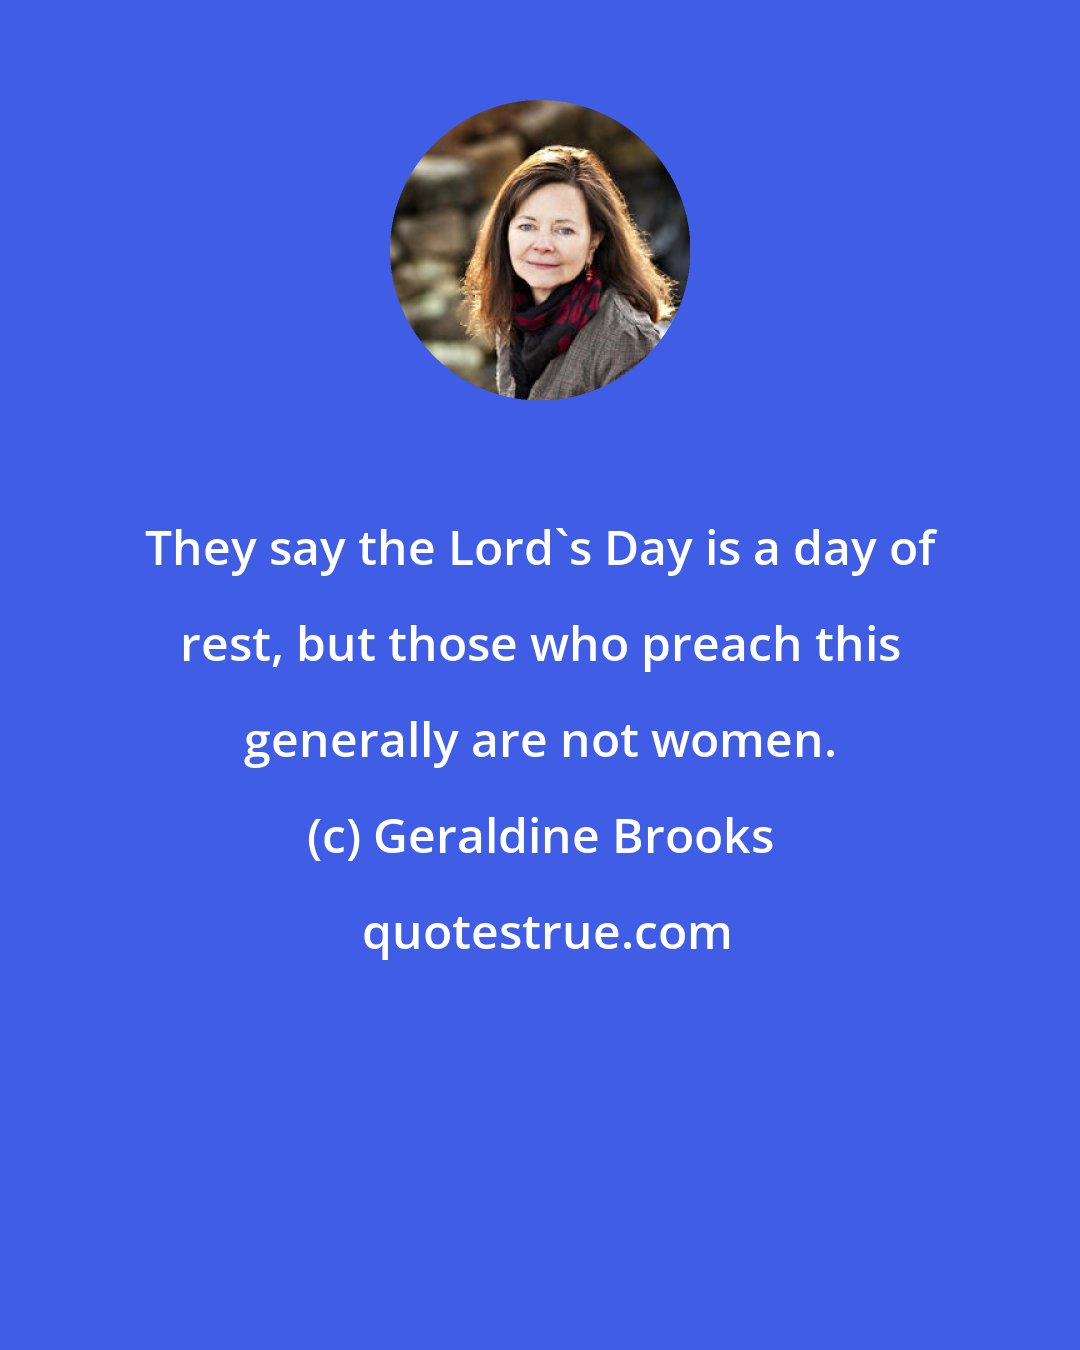 Geraldine Brooks: They say the Lord's Day is a day of rest, but those who preach this generally are not women.